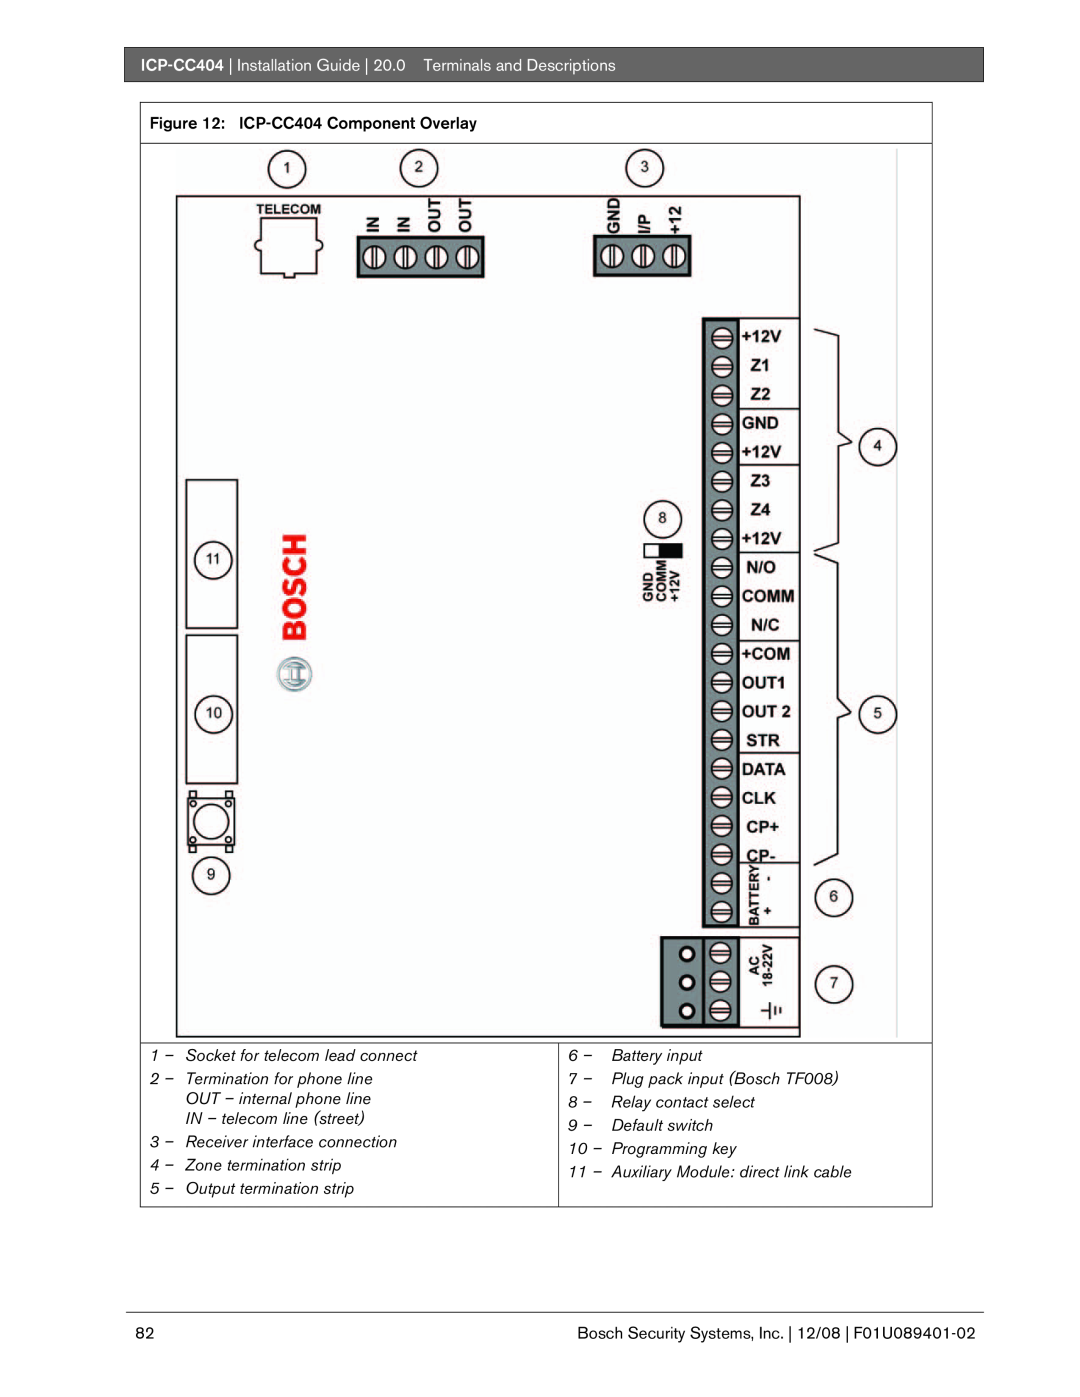 Bosch Appliances manual ICP-CC404Component Overlay 